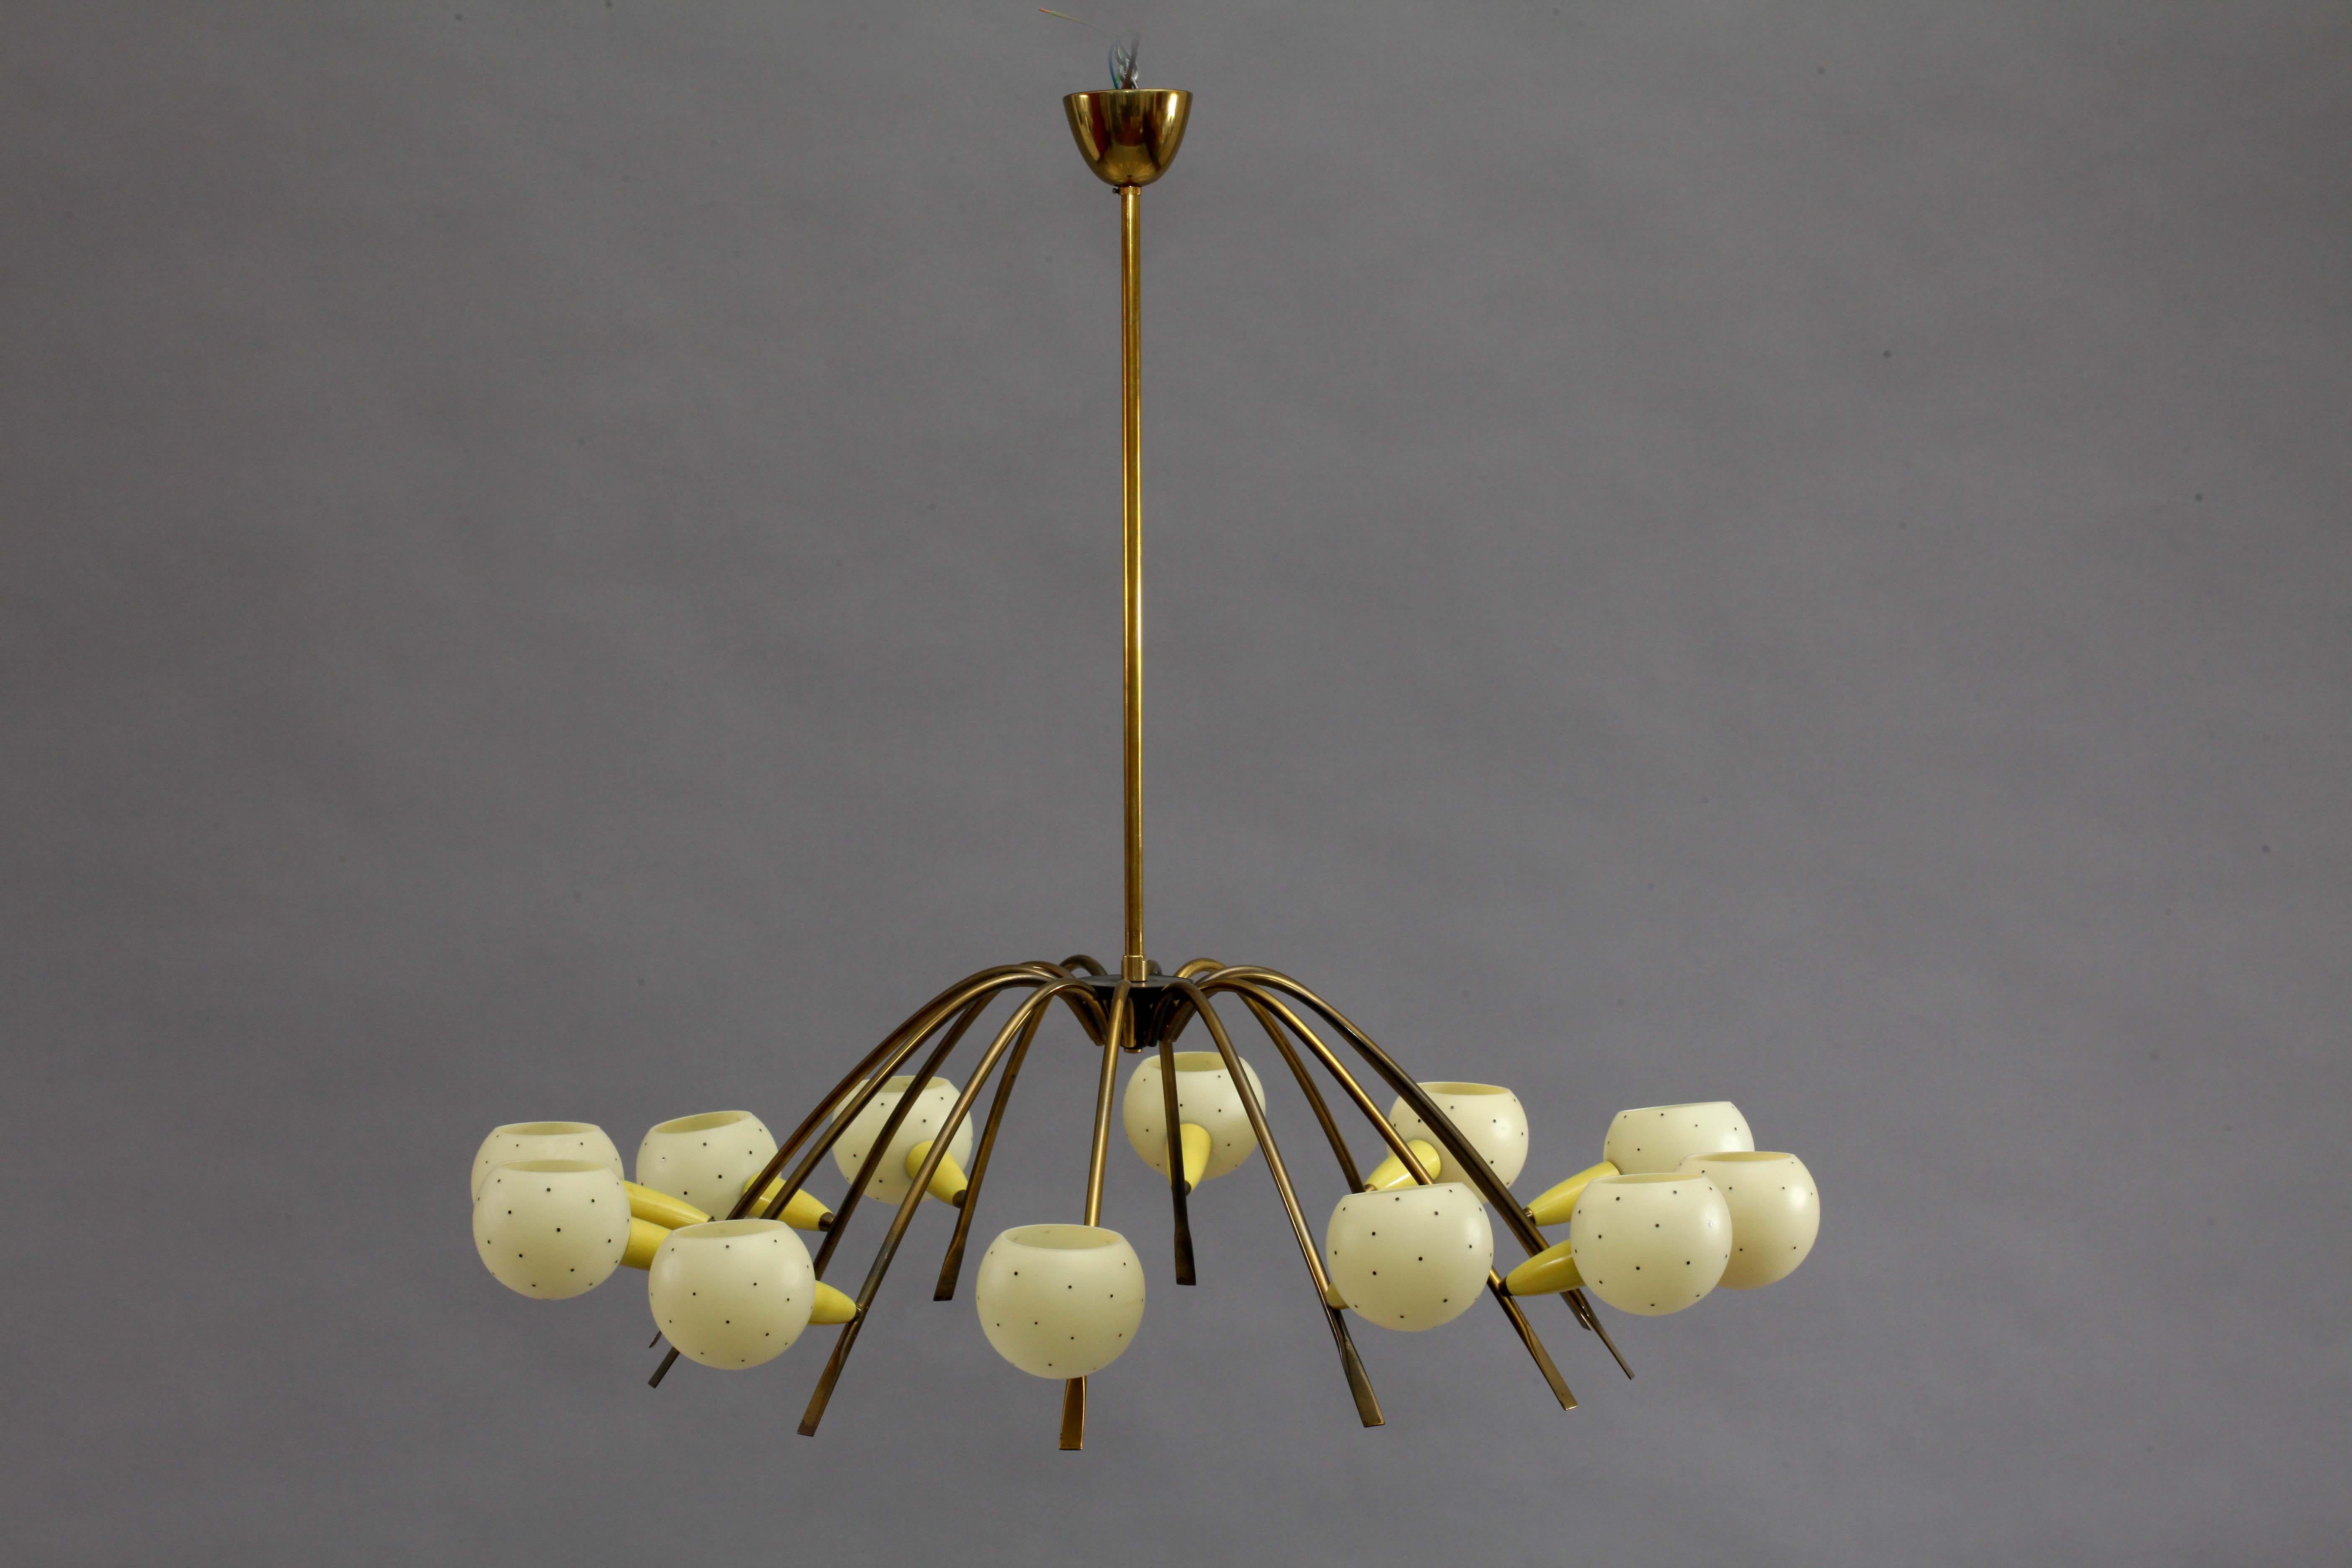 Big Italian Sputnik chandelier
attributed Stilnovo,
Italy, 1950.
12 brass arms, enameled cones, round glass shades with little black dots.
Measures: Height 100cm, diameter 100cm.
    